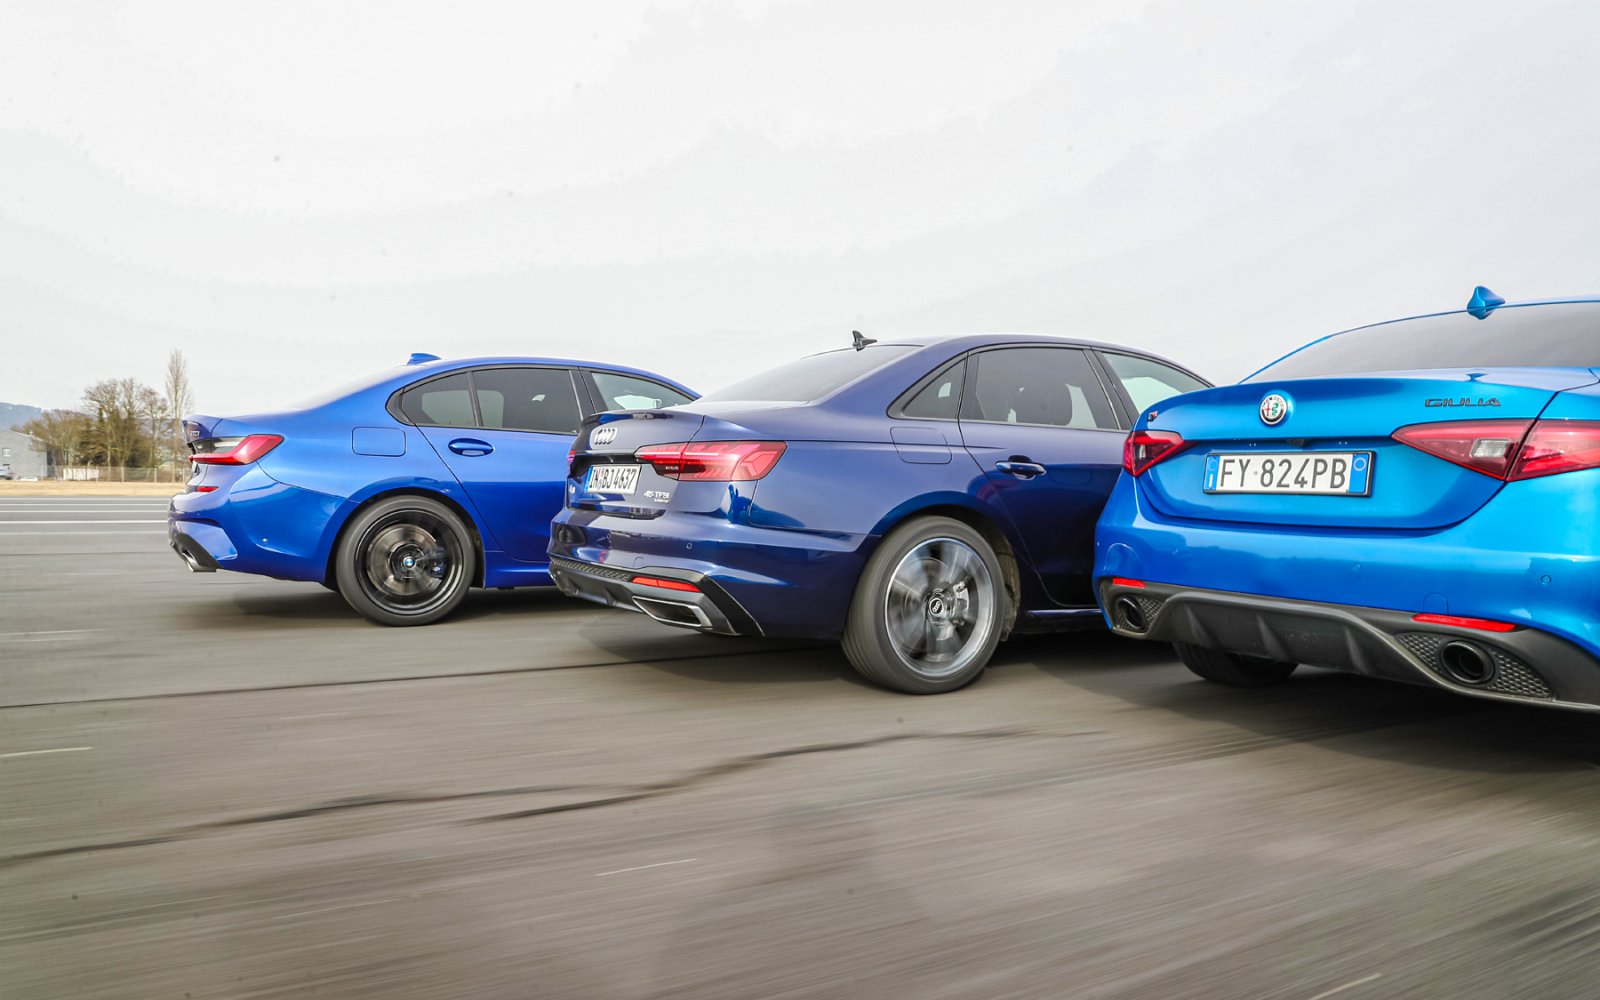 Test Giulia, A4 and Series 3: Why These Fast Sedans Are Bad for Your Blood Pressure